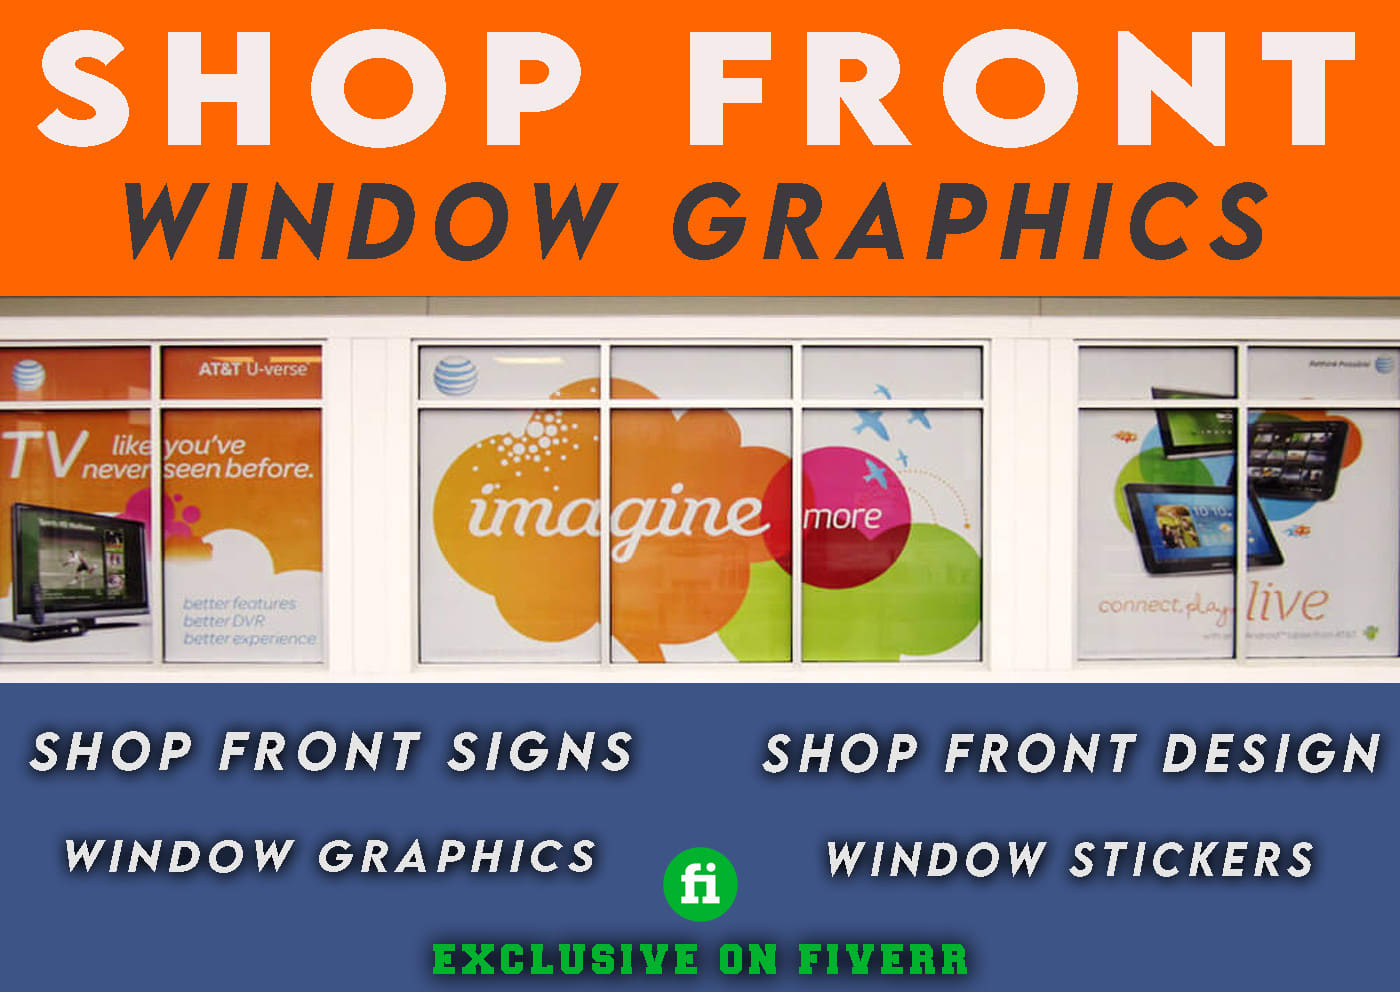 Interactive Graphics Bring the Fresh® Story to Life - Sign Builder